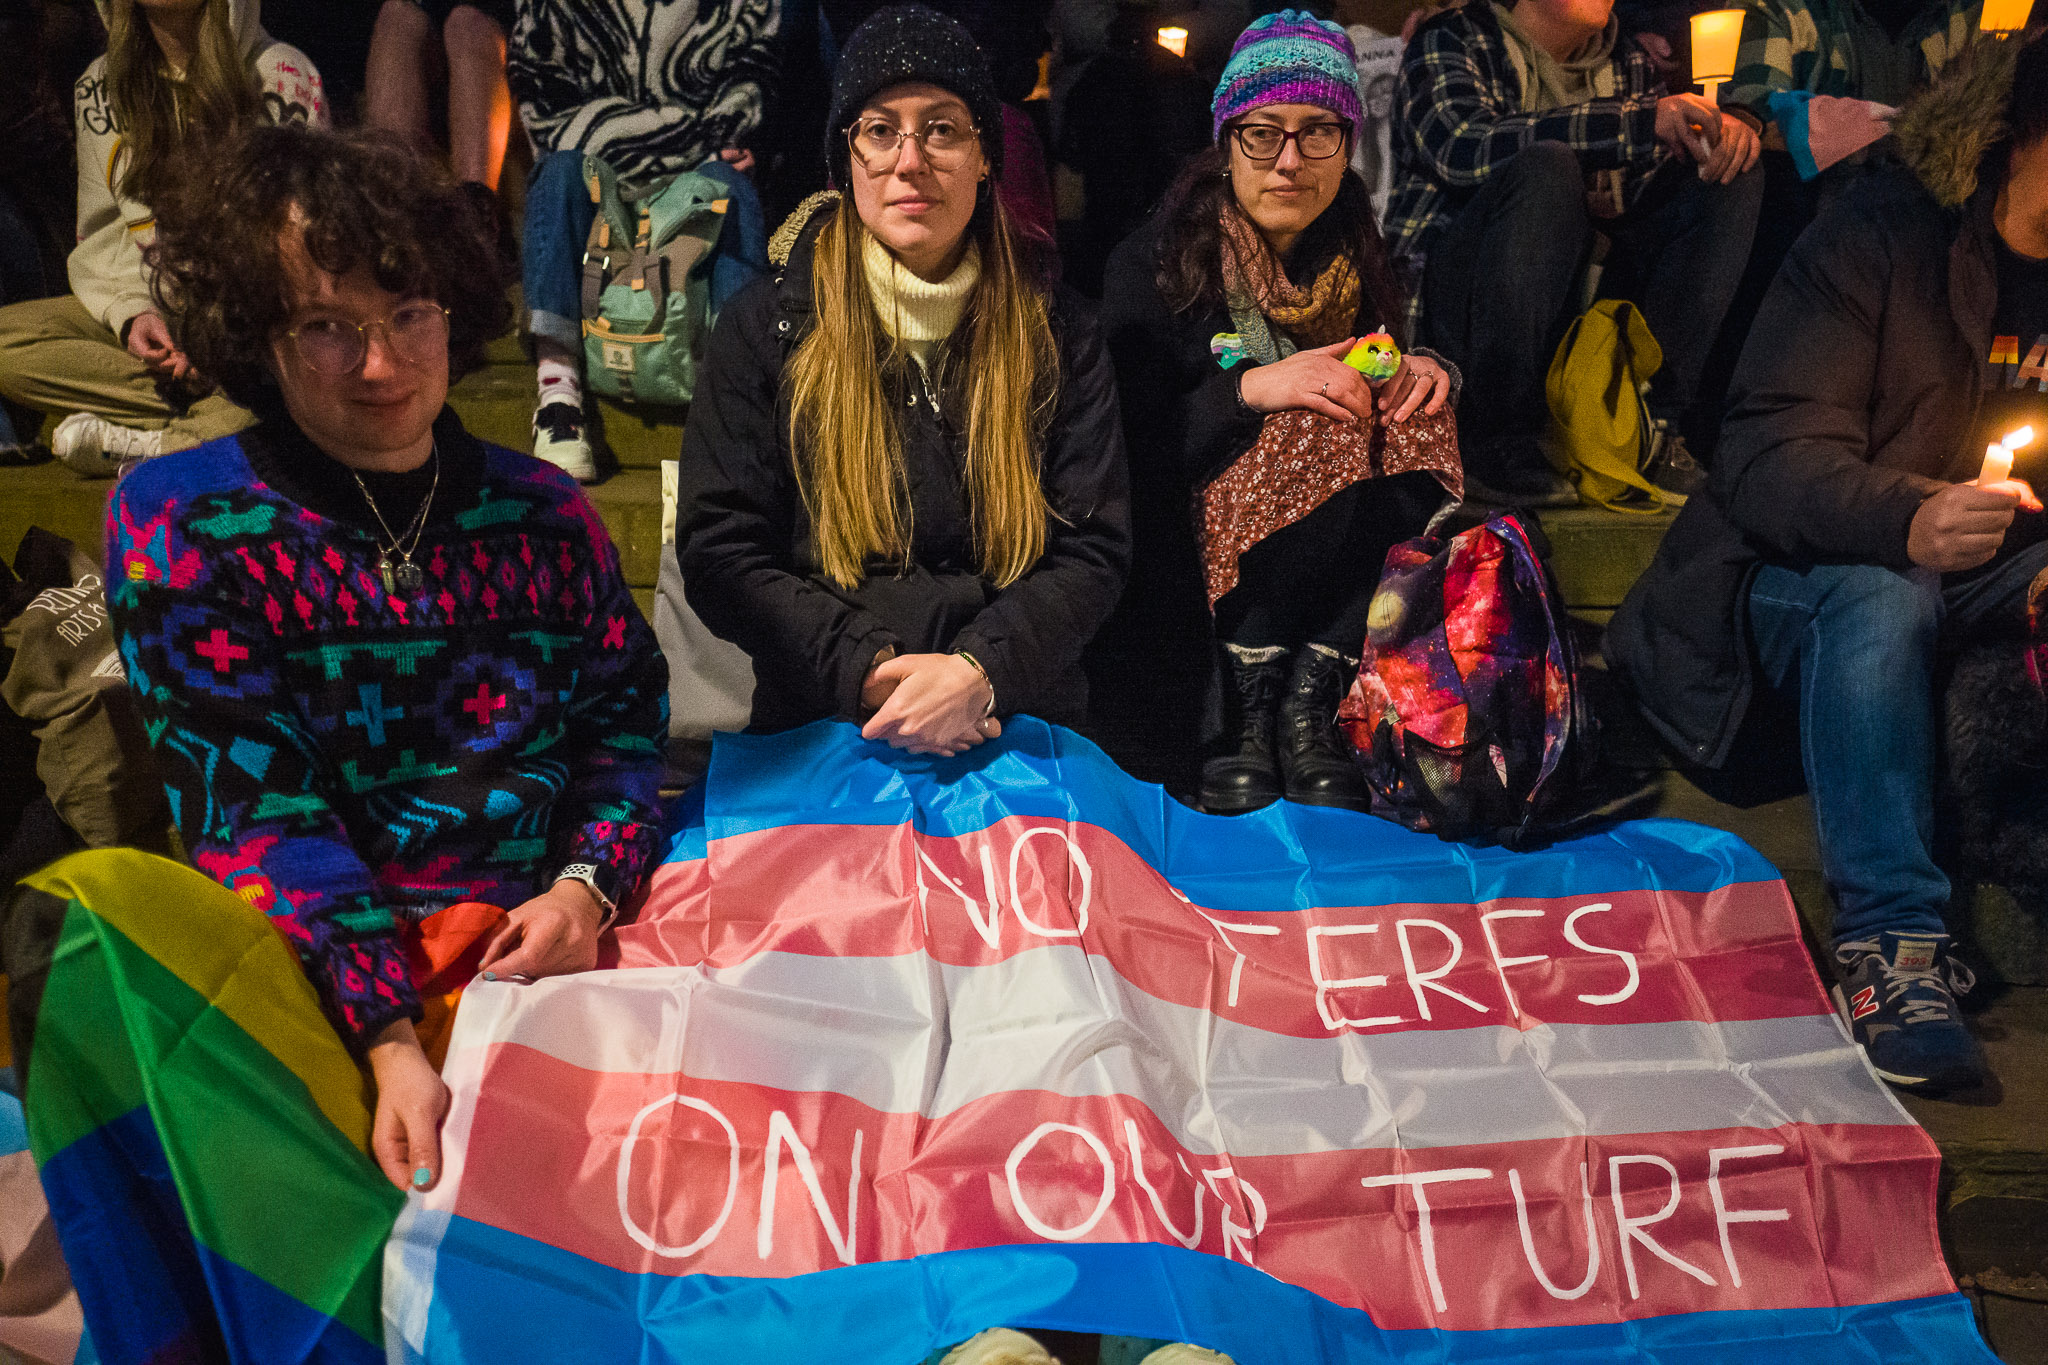 A group of people sitting with a trans flag that has the message "No TERFs on our turf on."